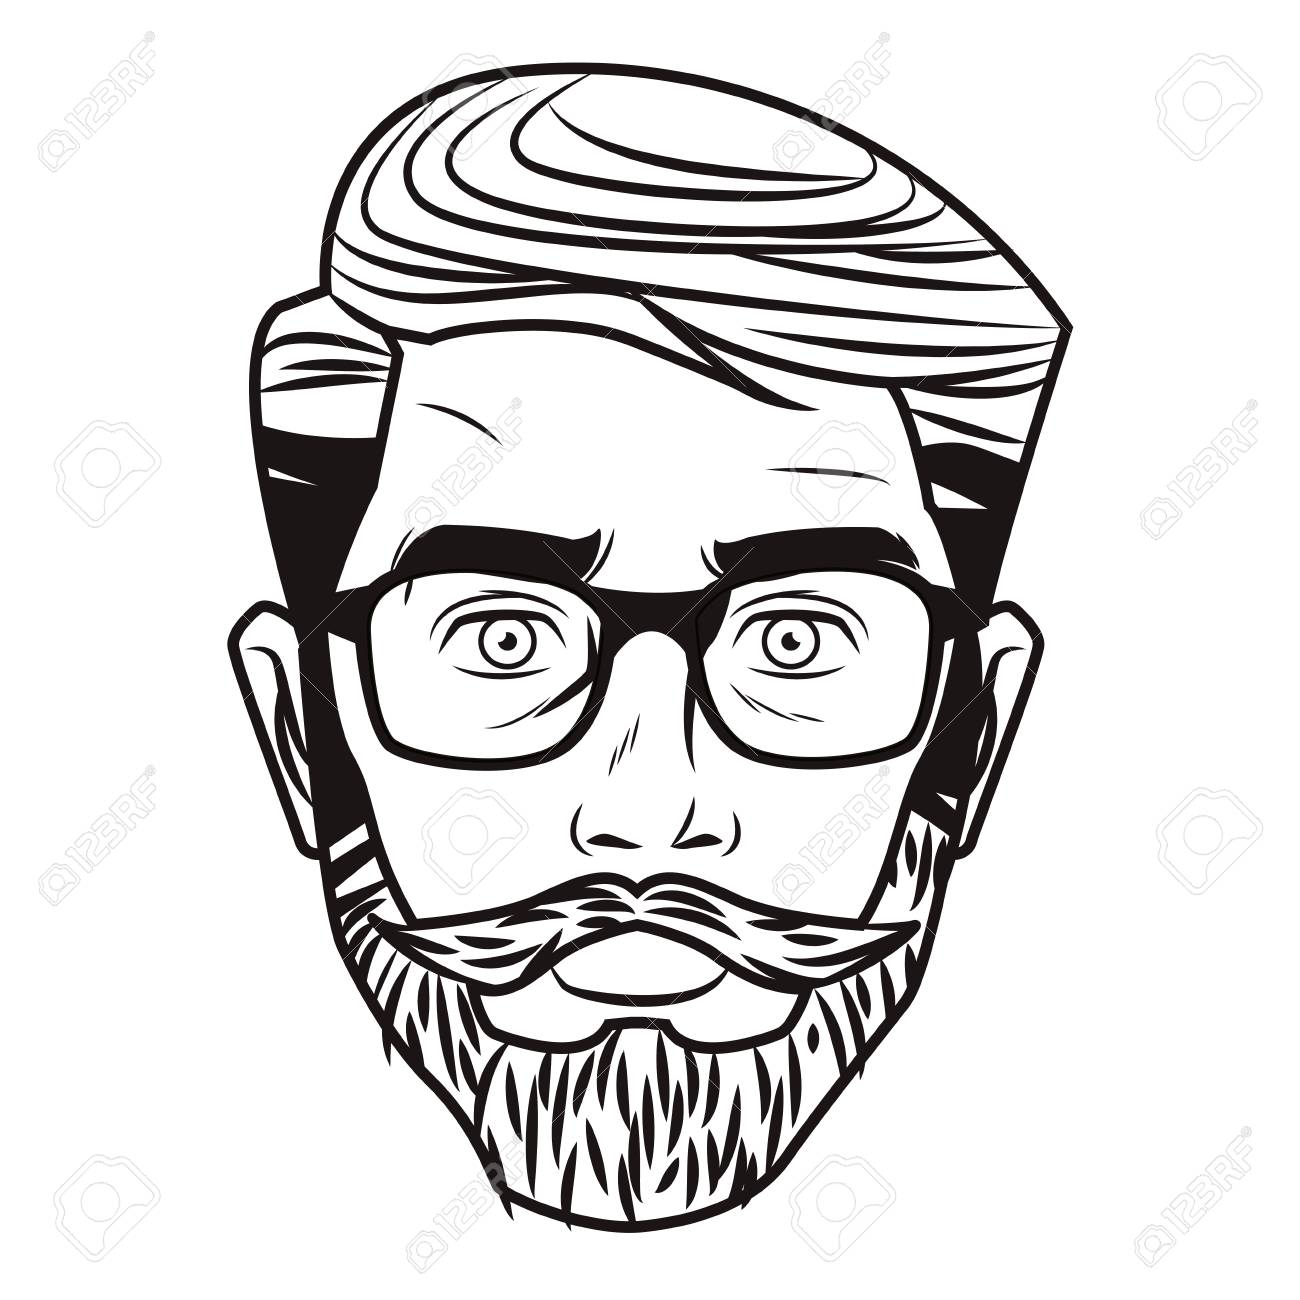 Pop art hispter man face with sunglasses in black and white vector...